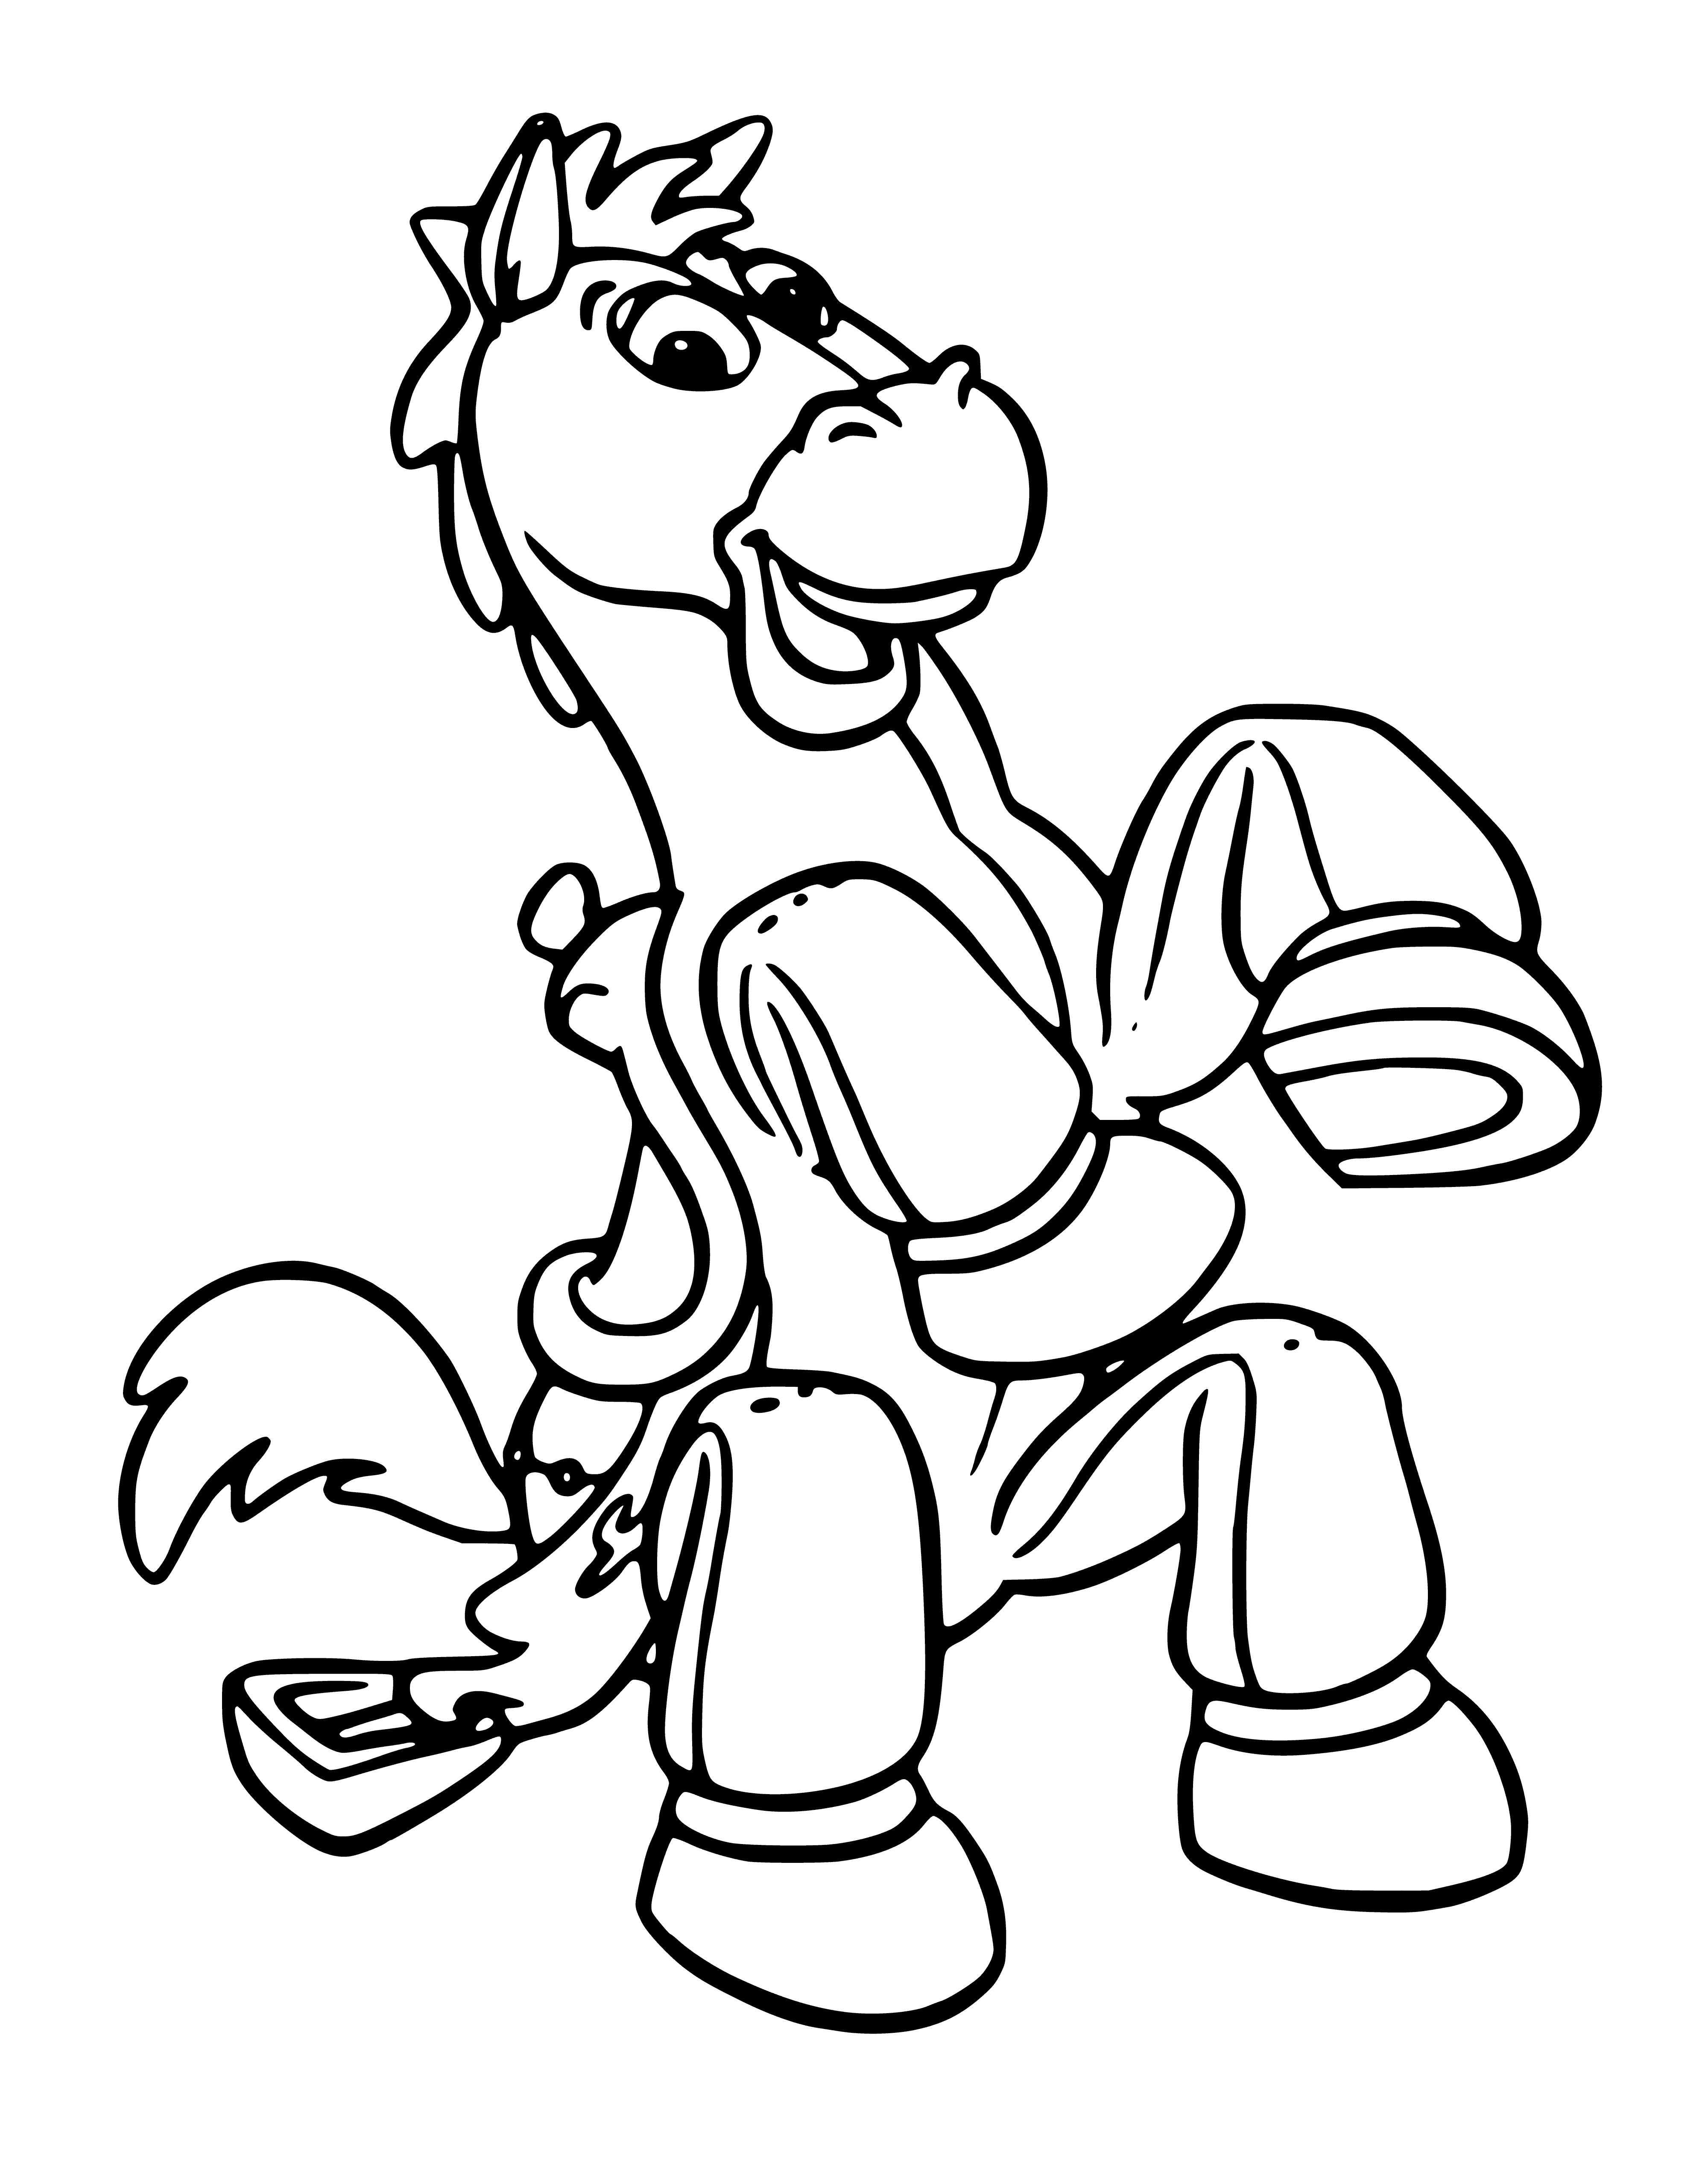 coloring page: Beautiful horse stands tall, light brown coat blowing in the wind. Left front leg raised and left hind bent at the knee, long tail flowing.